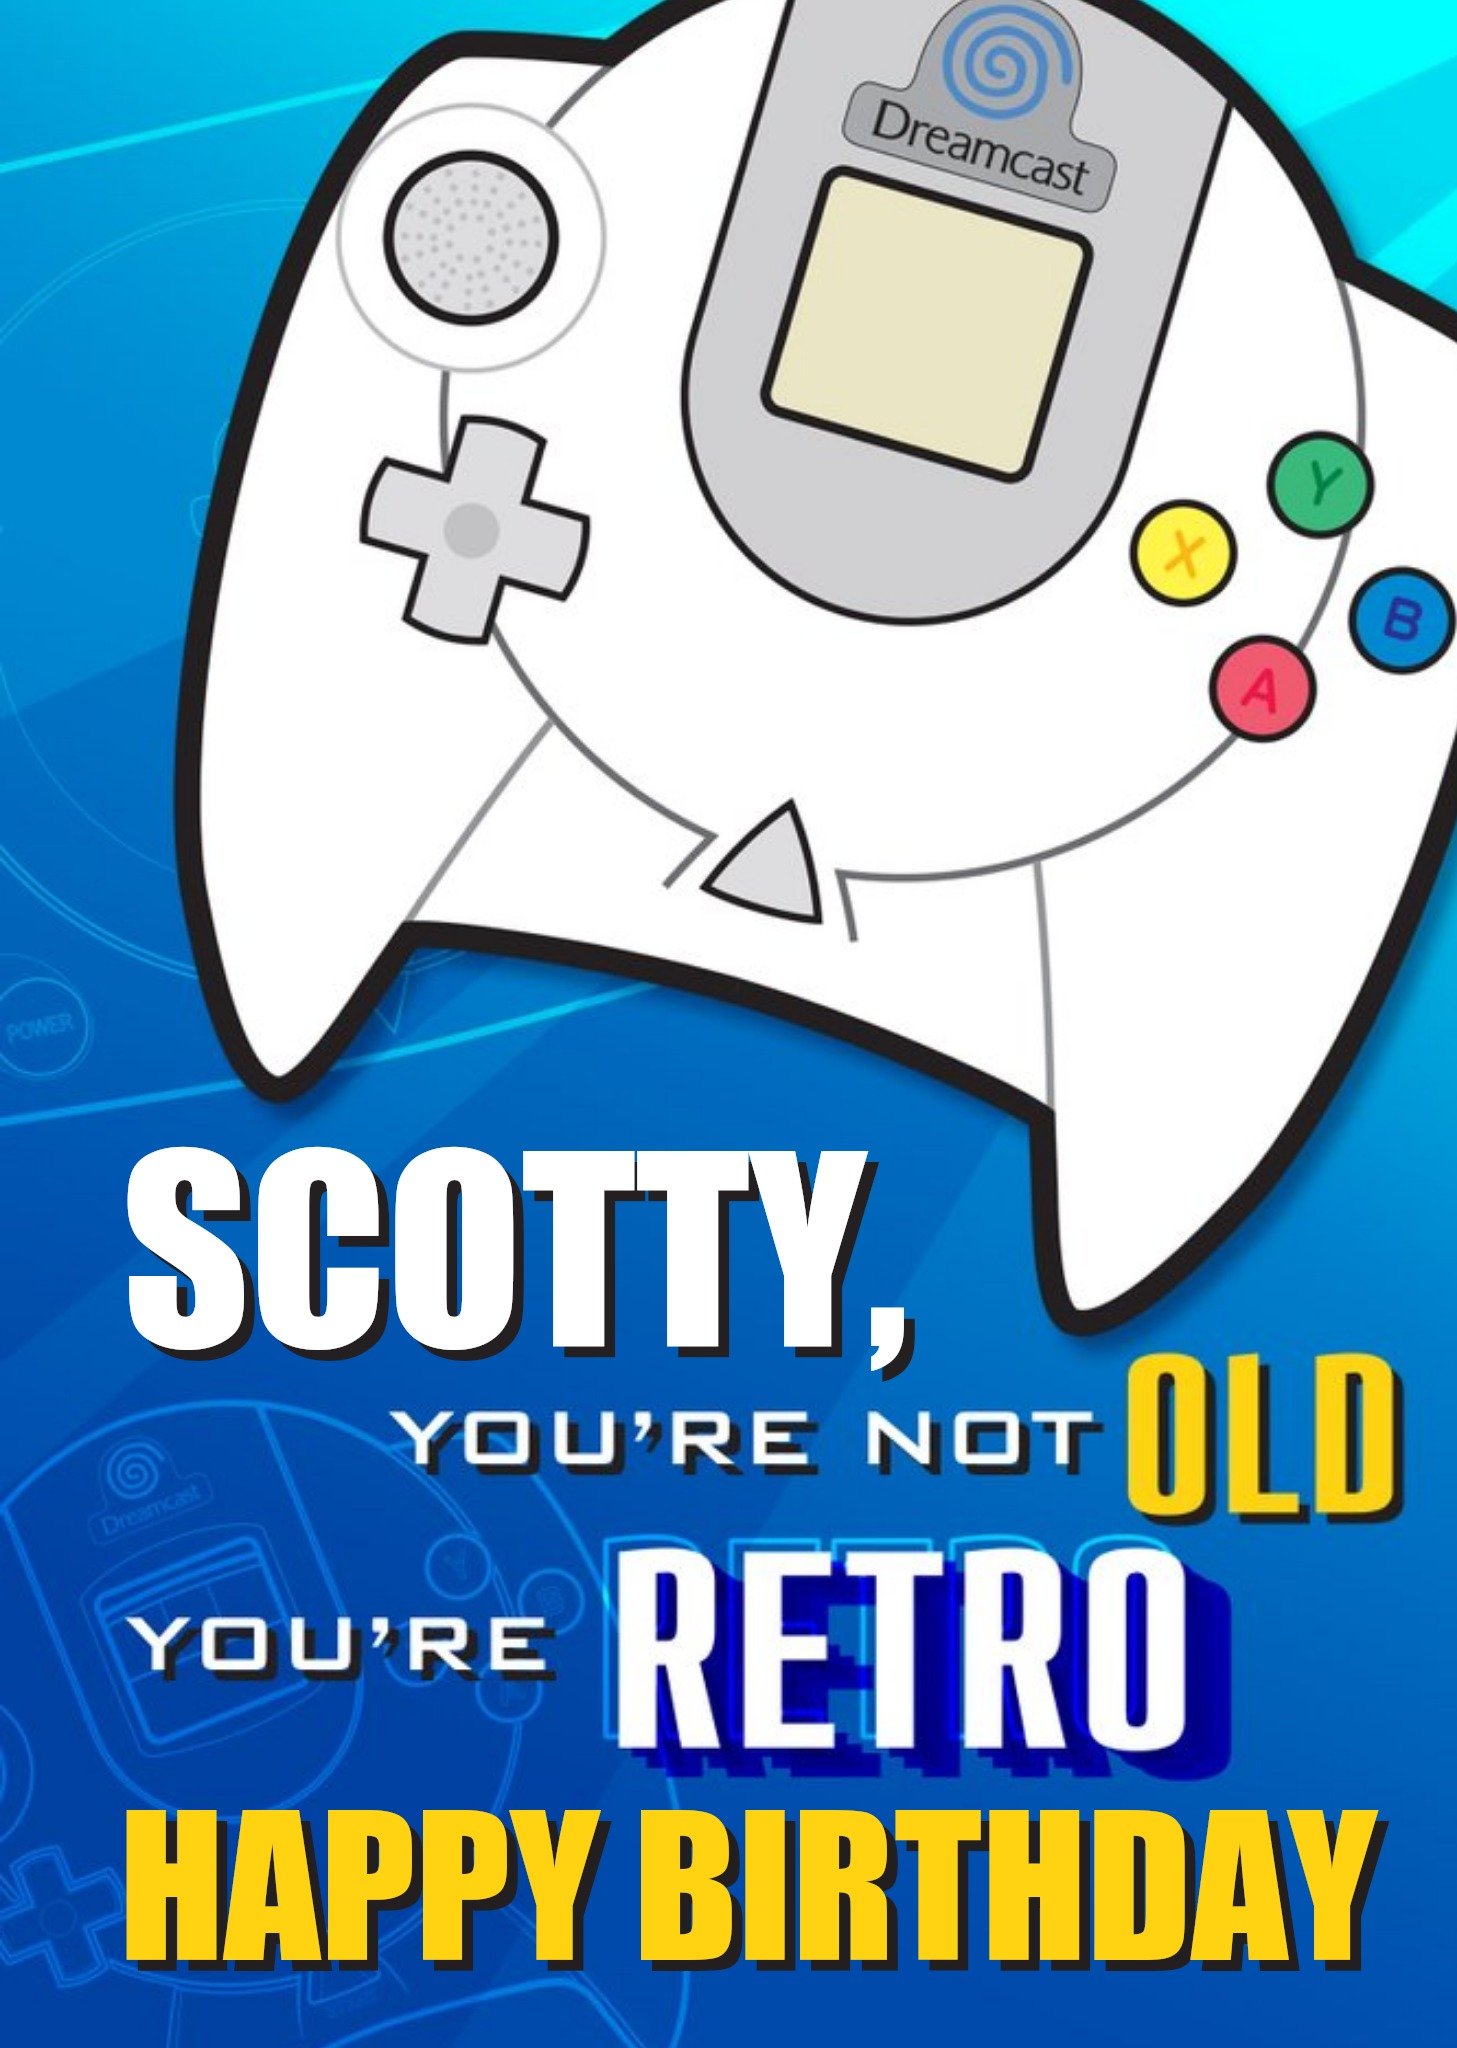 Other Sega Consoles Dreamcast You're Not Old You're Retro Birthday Card, Large